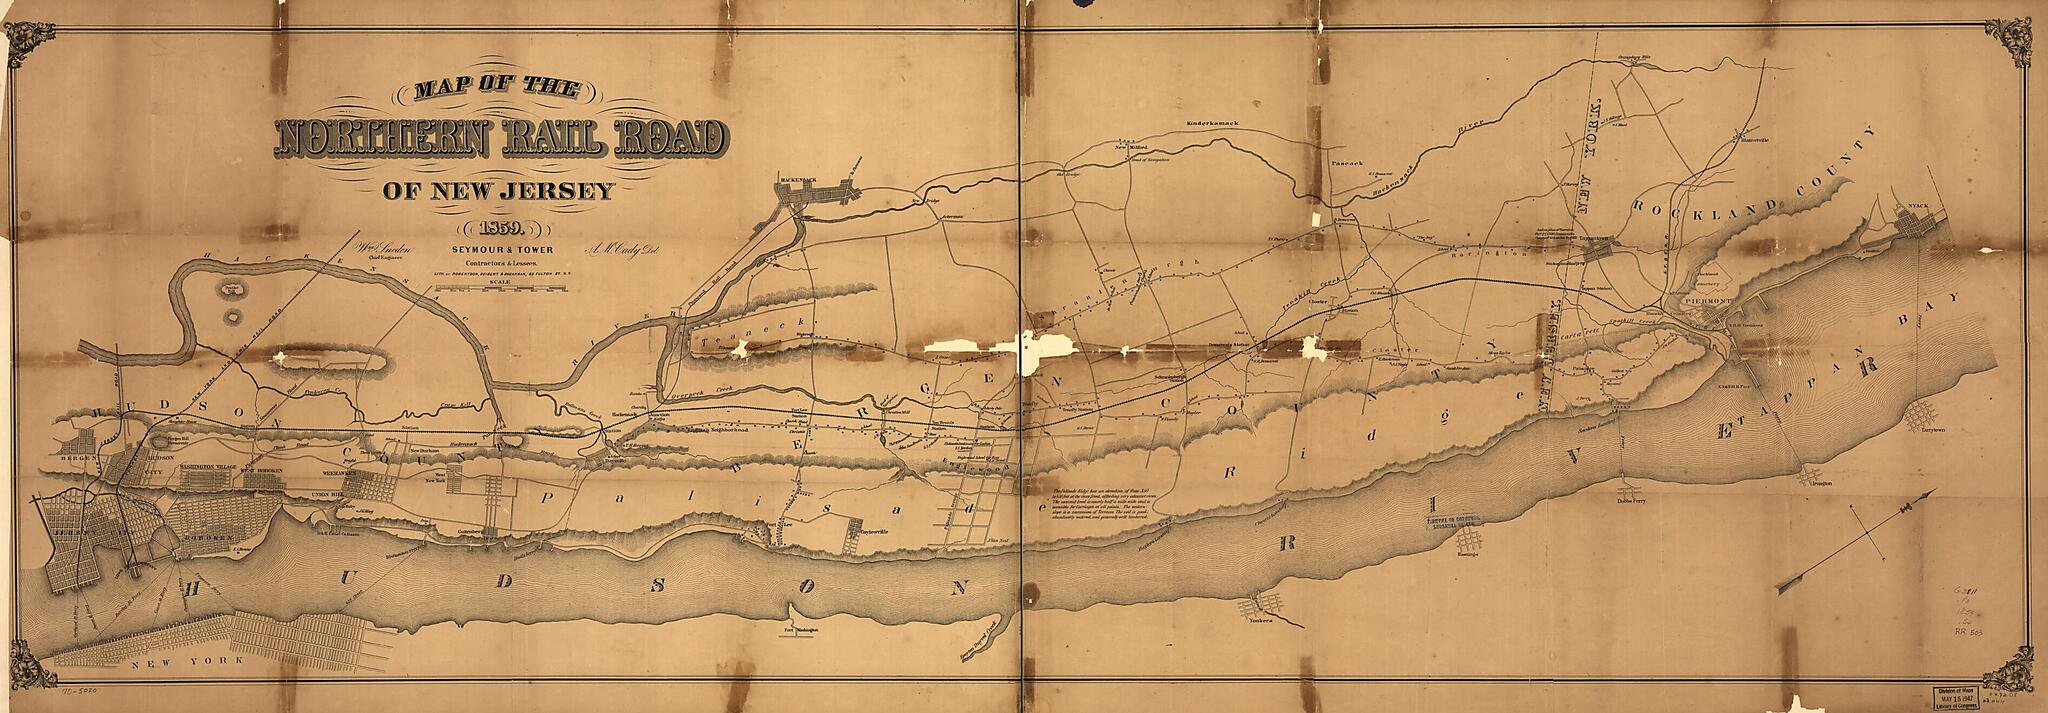 This old map of Map of the Northern Rail Road of New Jersey from 1859 was created by A. M. Cady, Seibert &amp; Shearman Robertson,  Seymour &amp; Tower, William S. Sneden in 1859